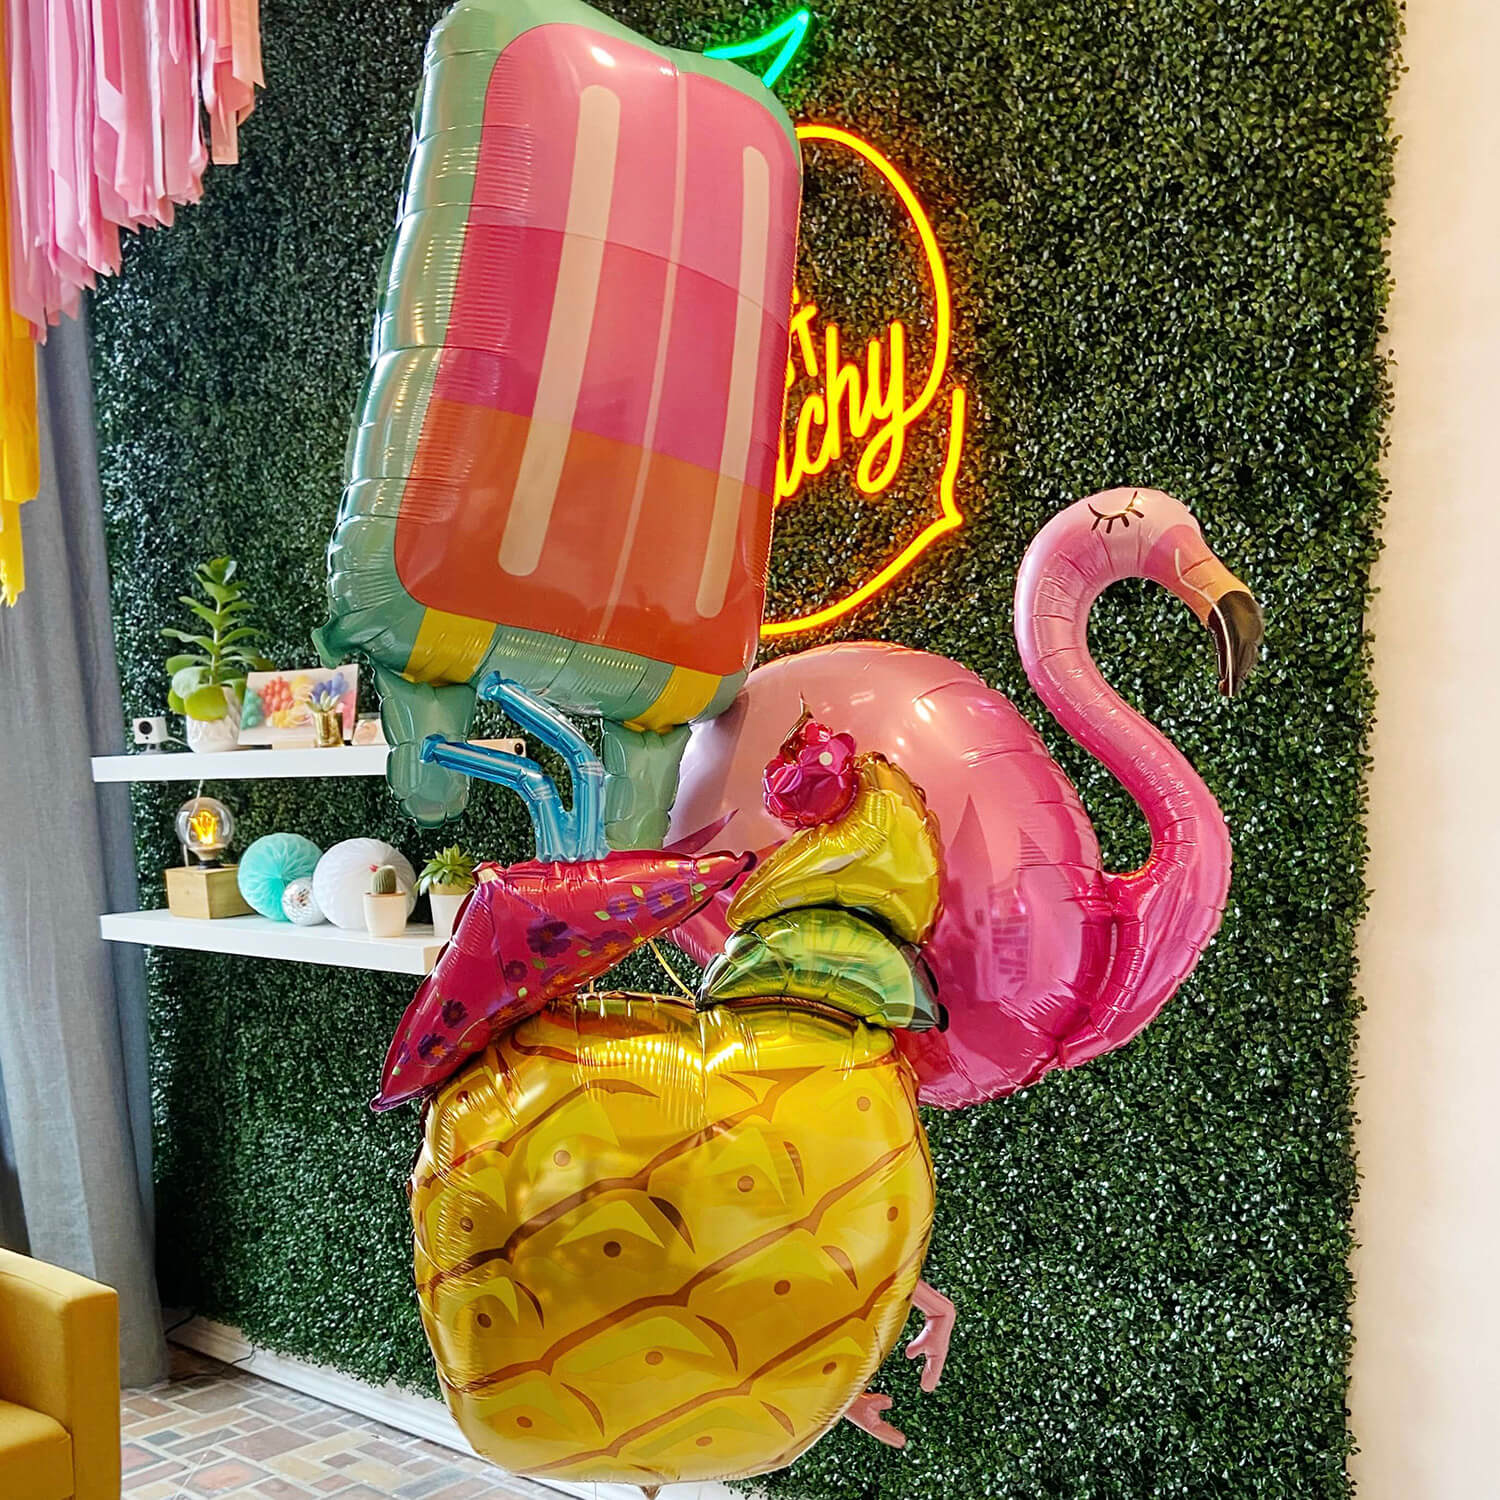 It’s always summertime with this combo of giant balloons: popsicle, flamingo, and tropical drink in a coconut.